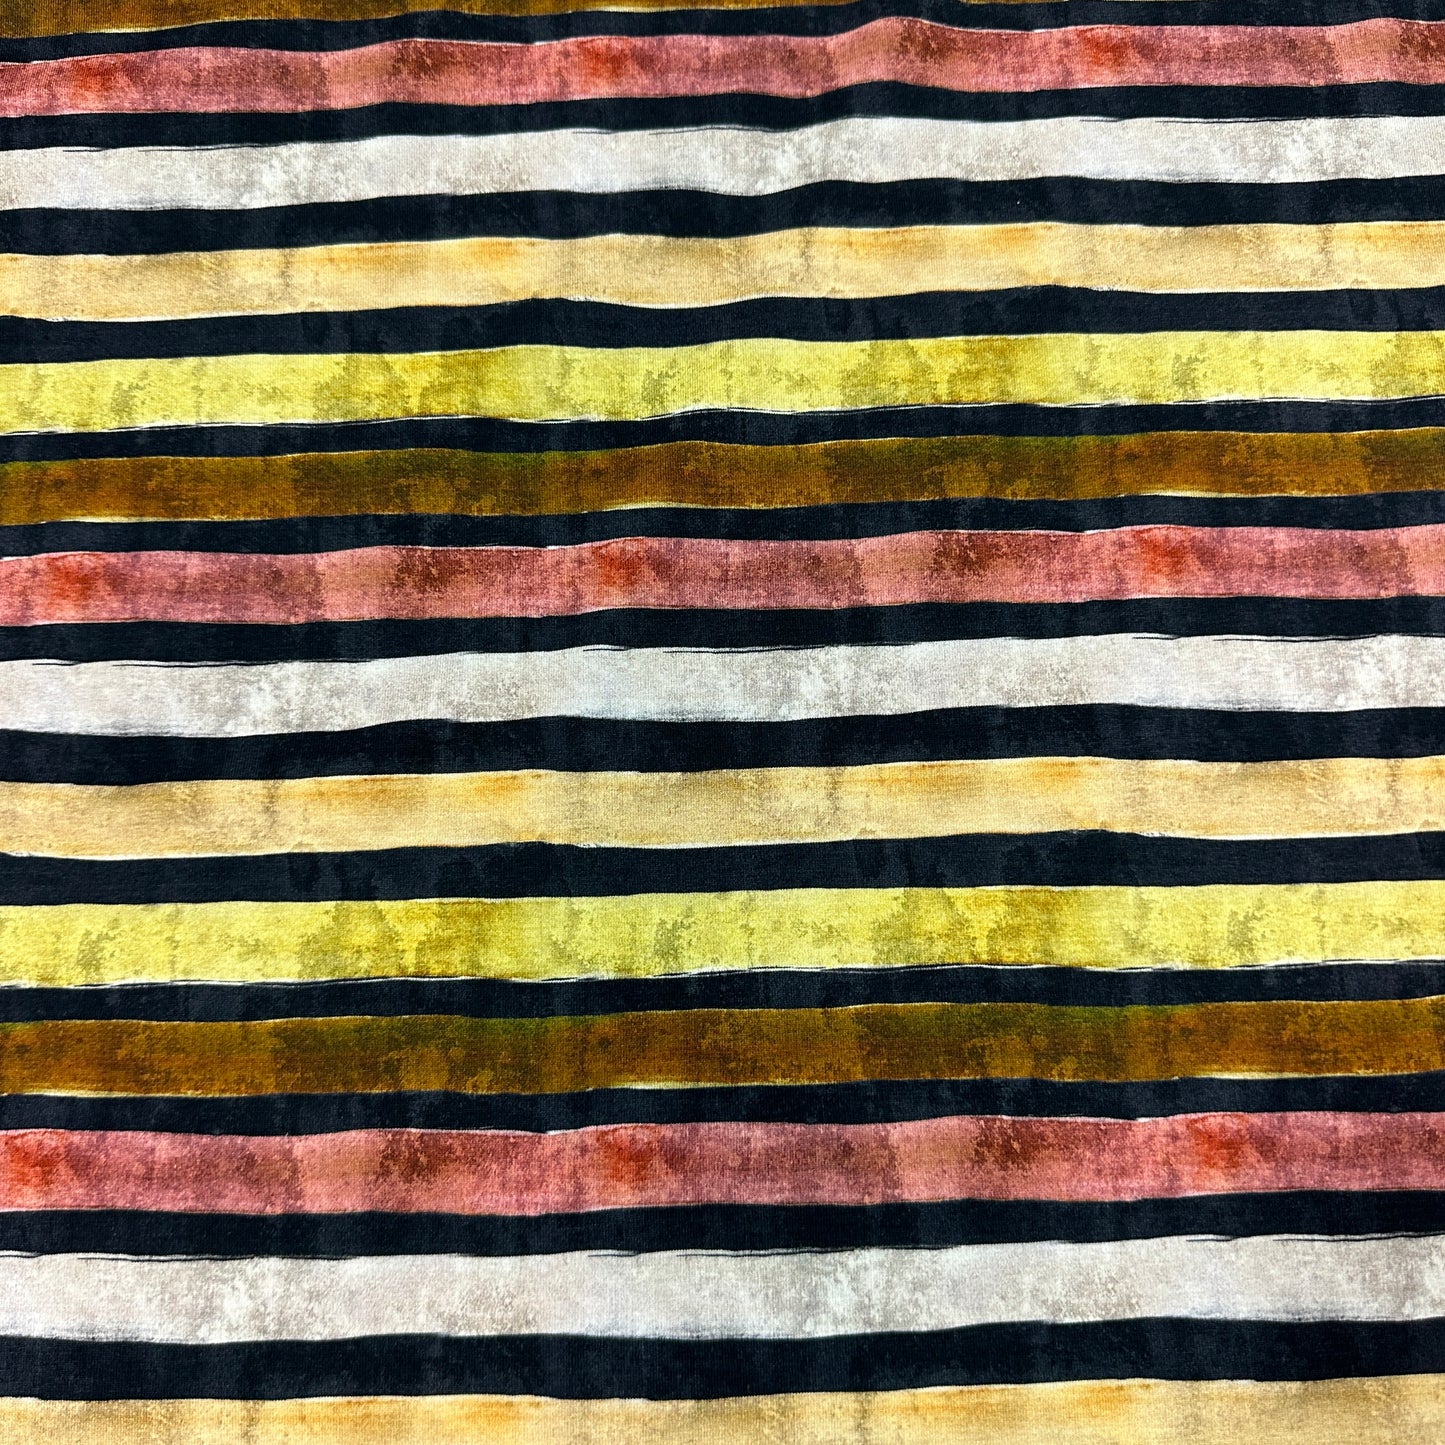 Distressed Earth Tone Stripes on Black Bamboo/Spandex Jersey Fabric